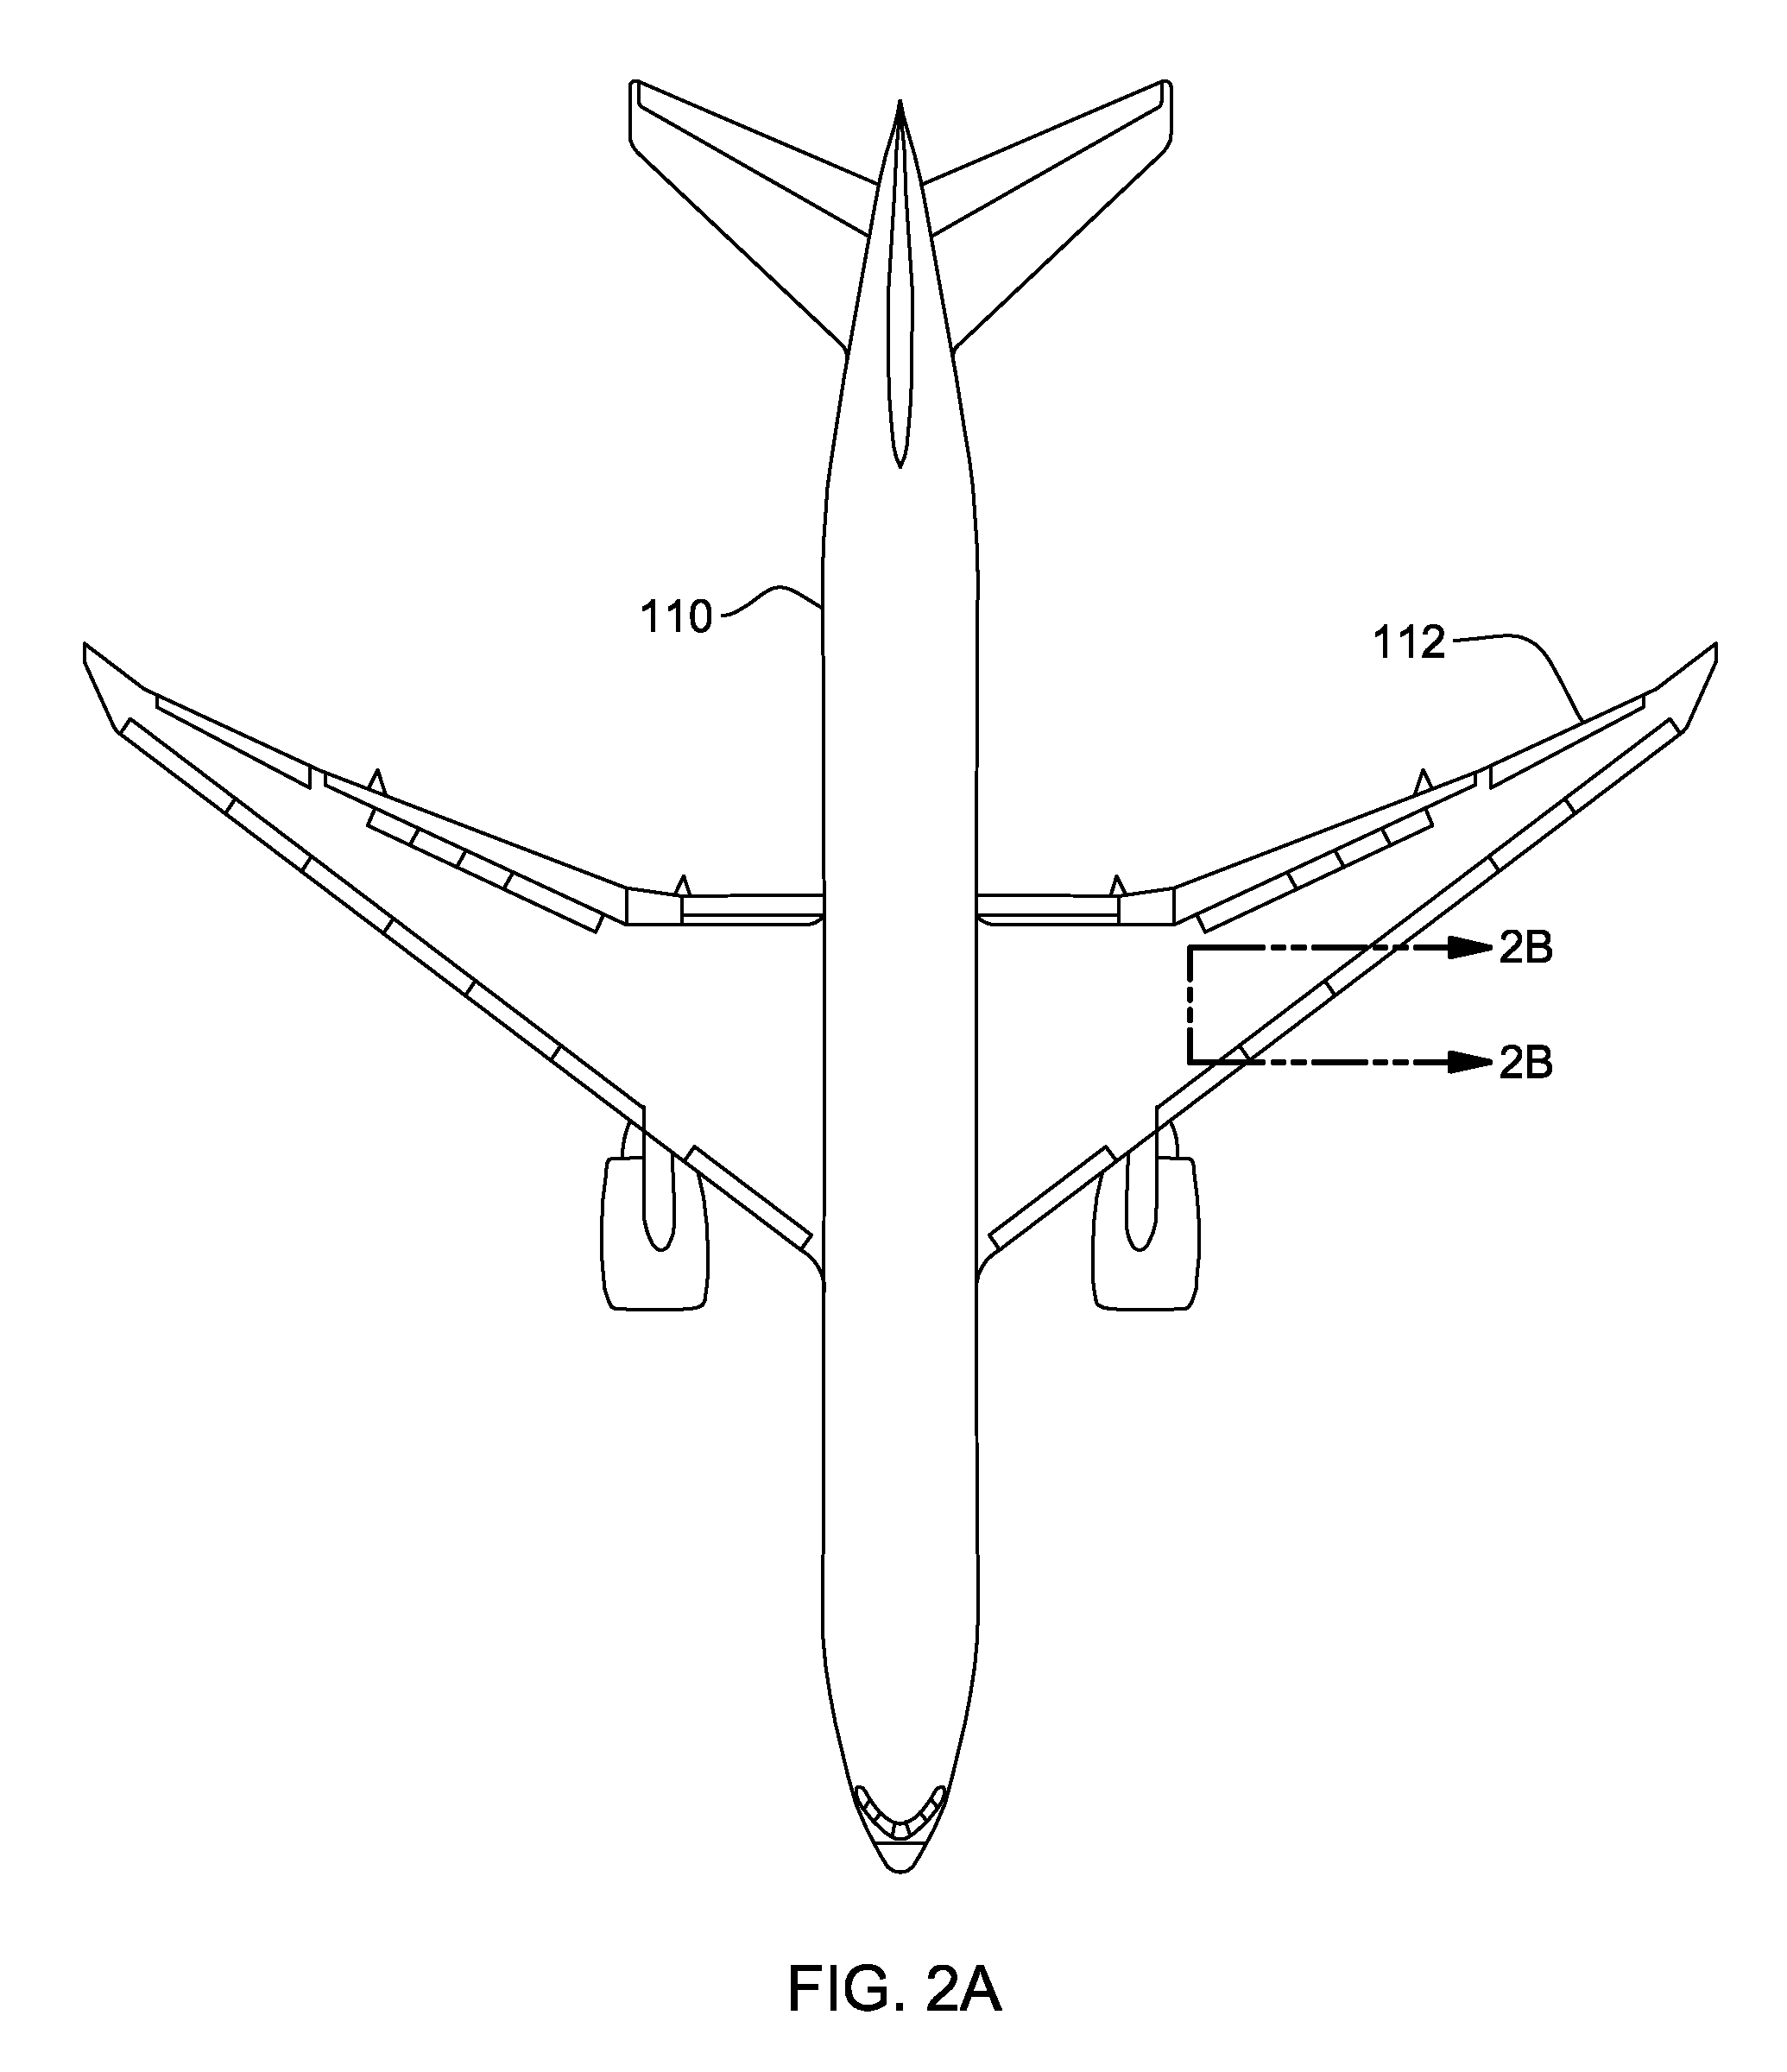 Fastening assembly including washer for sealing the assembly for lightning strike protection in composite structures